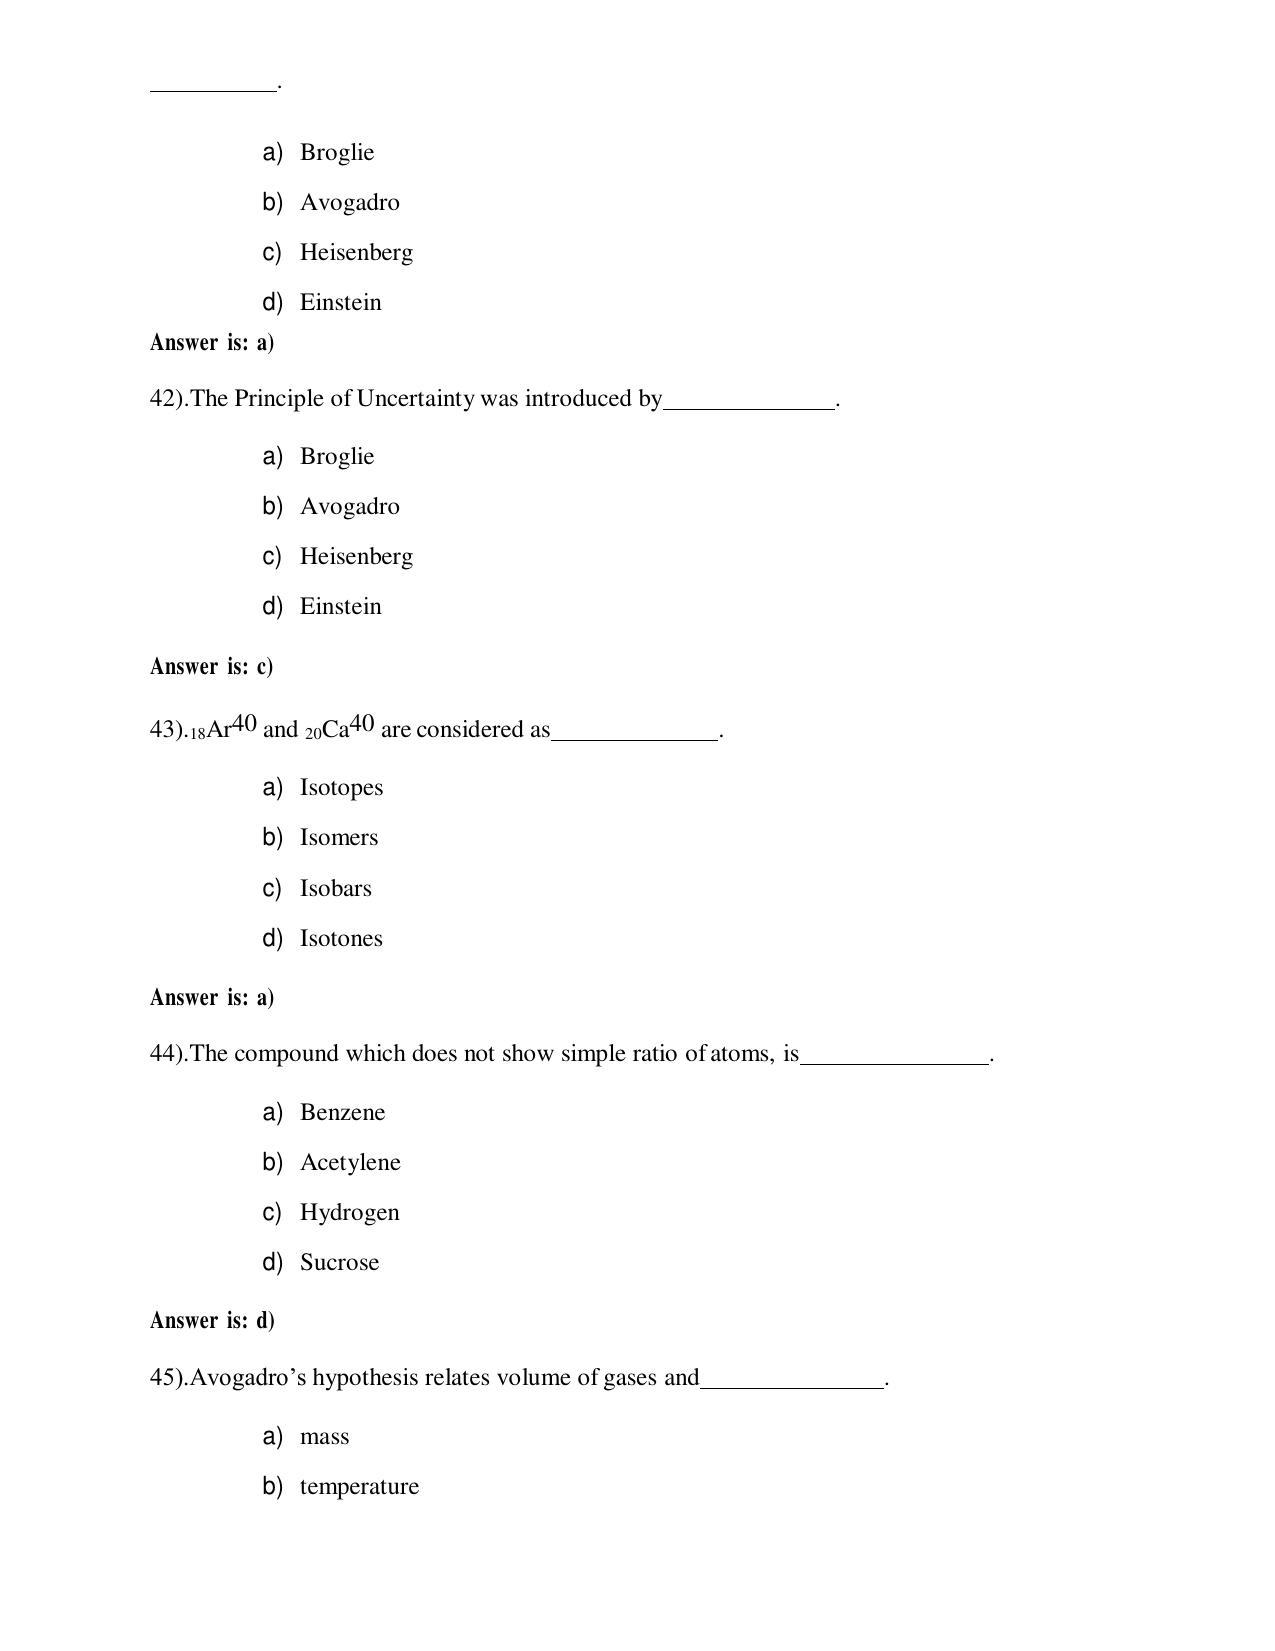 OUAT Chemistry Sample Paper - Page 10